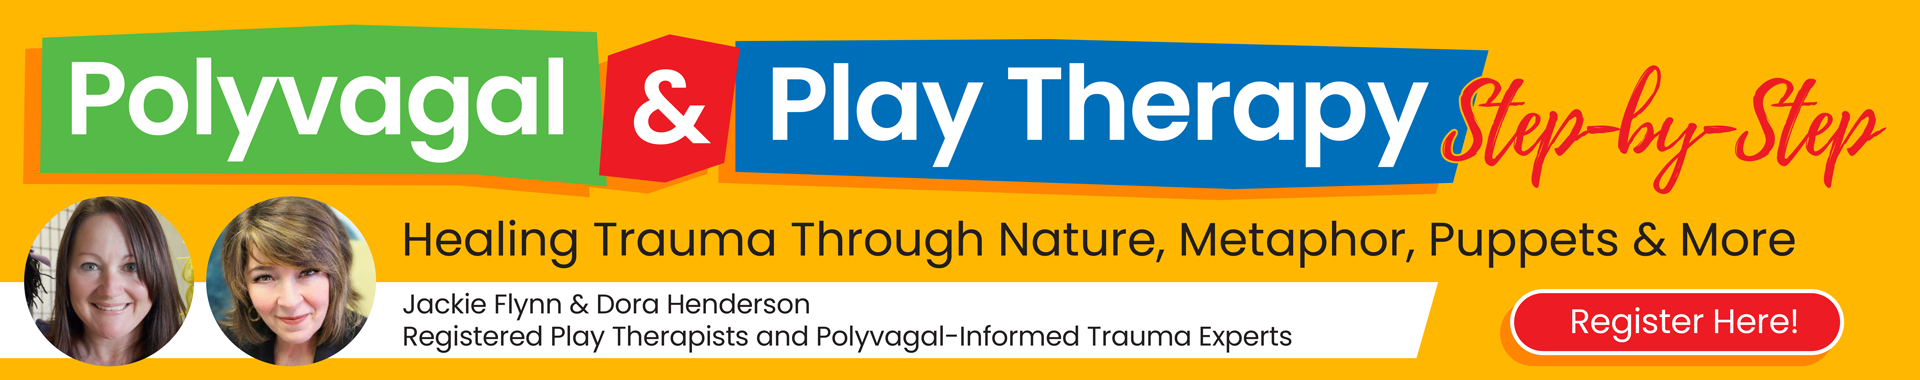 Polyvagal & Play Therapy Step-by-Step: Healing Trauma Through Nature, Metaphor, Puppets & More